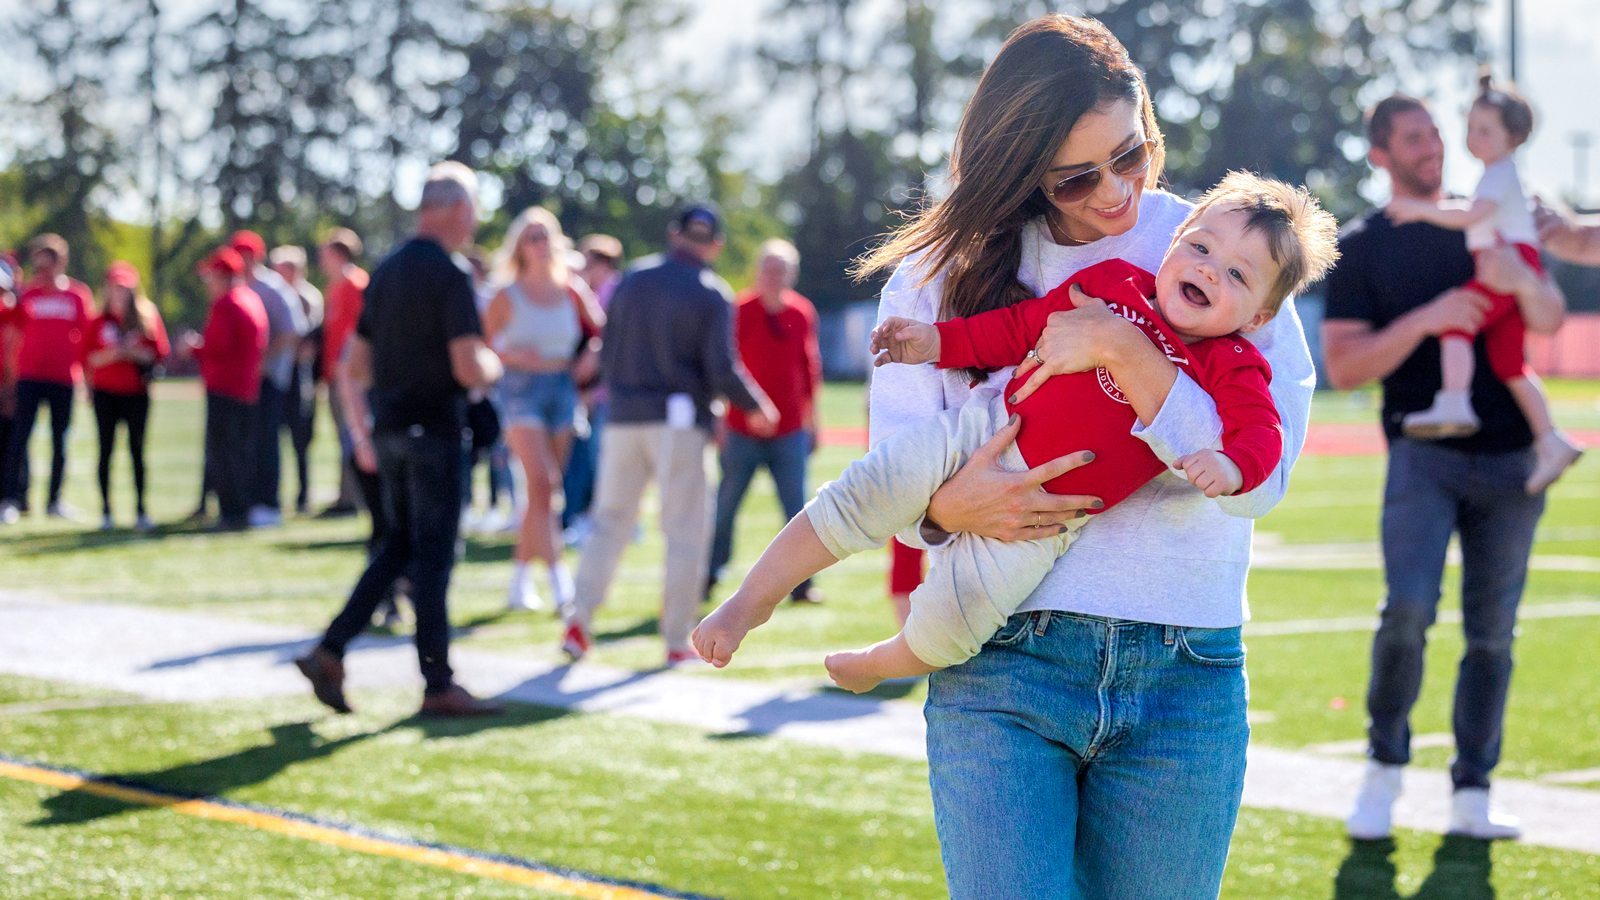 A woman holds a small child at Schoellkopf Stadium before the Homecoming football game